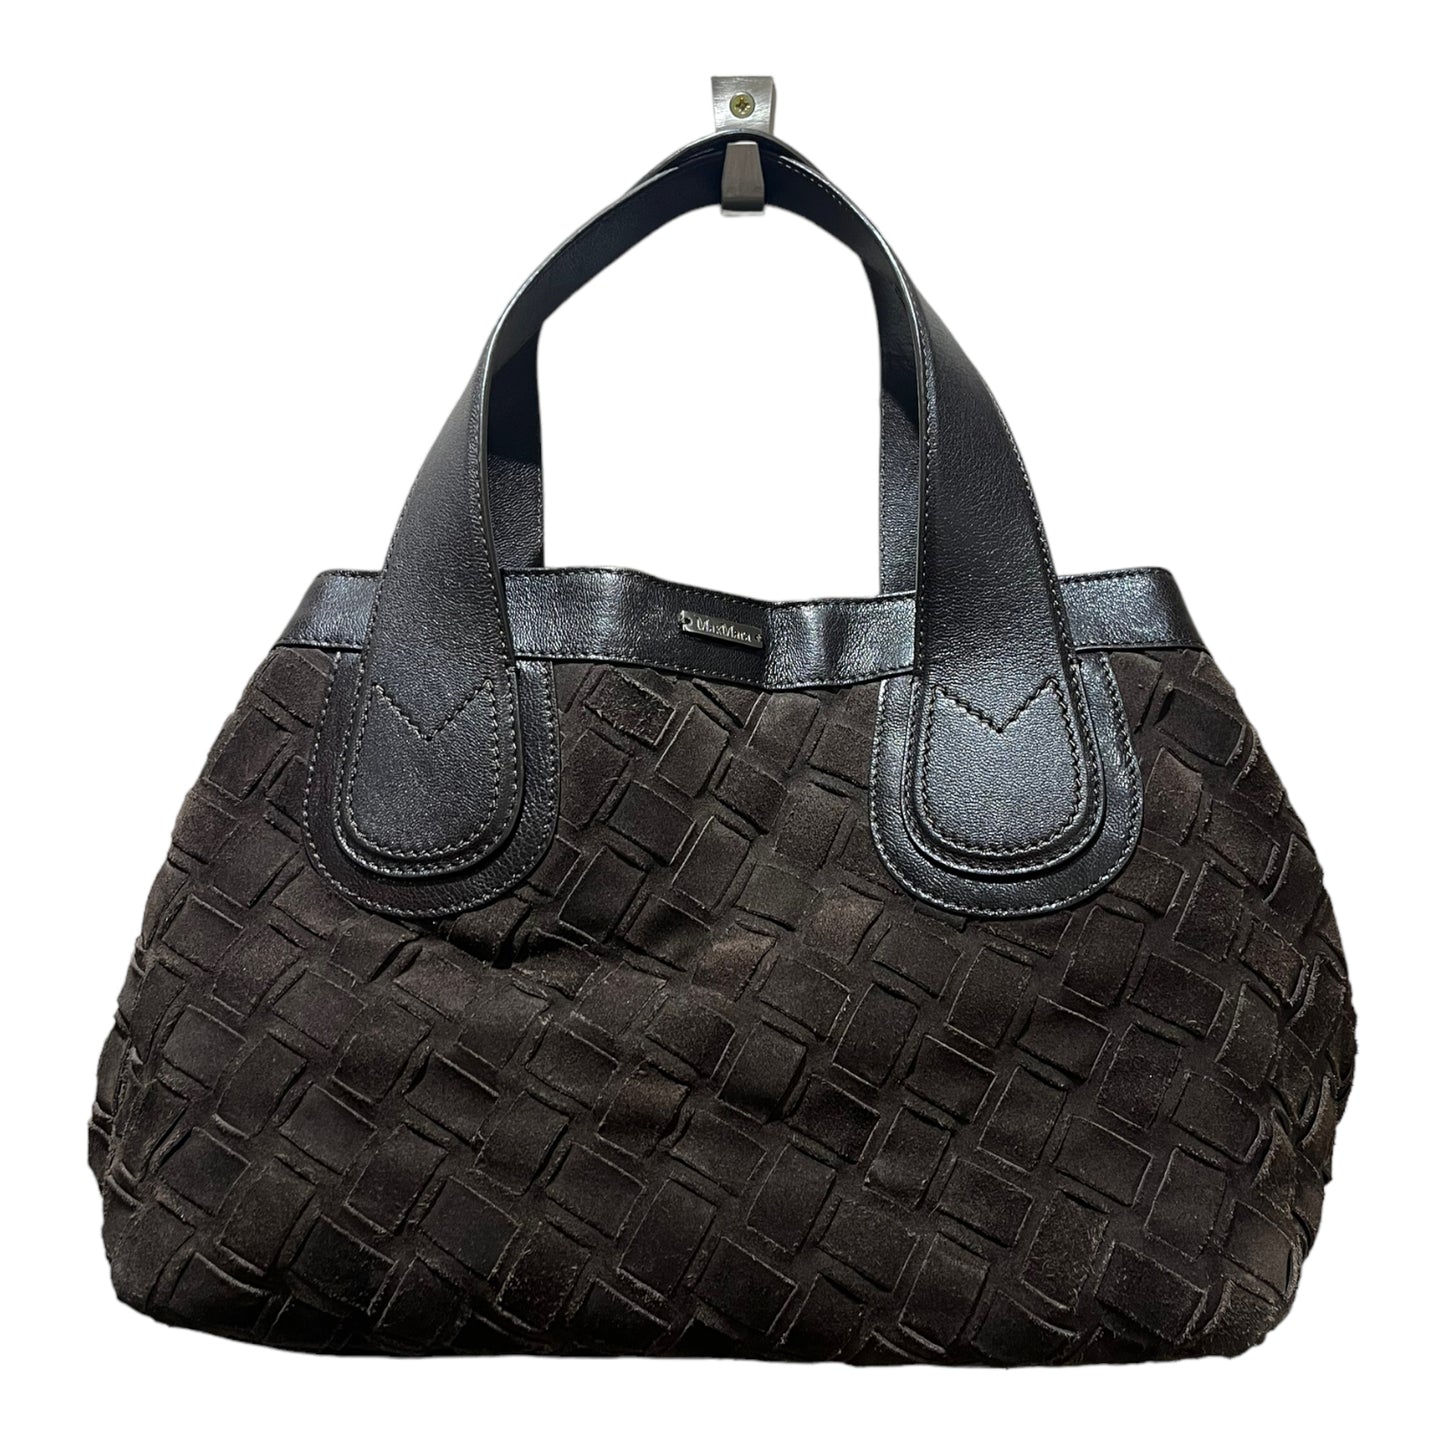 Max Mara Brown Leather and Suede Bag